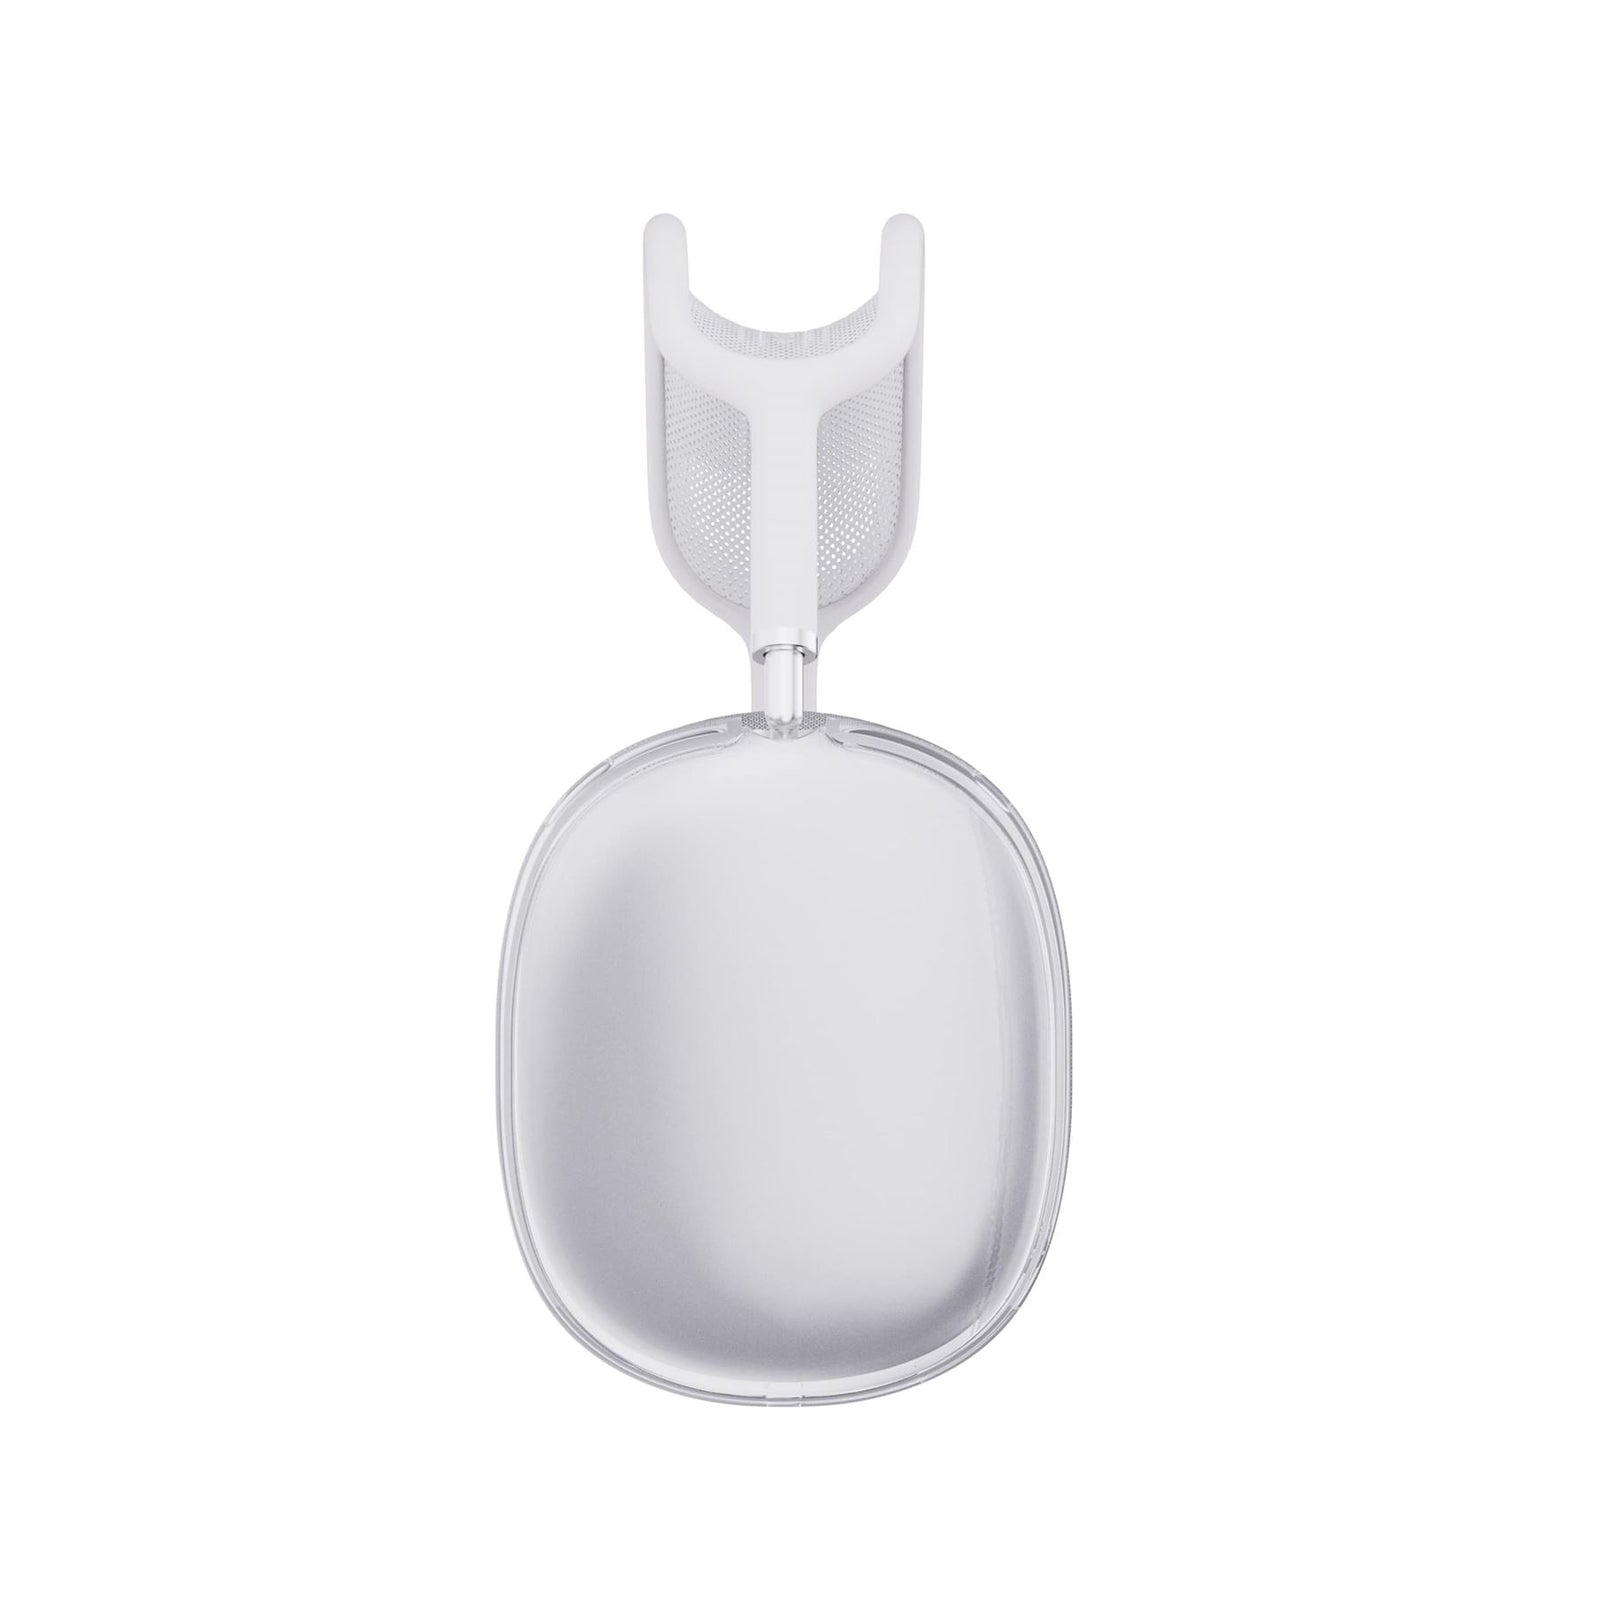 EvoClear - Apple Airpods Max Covers - Clear